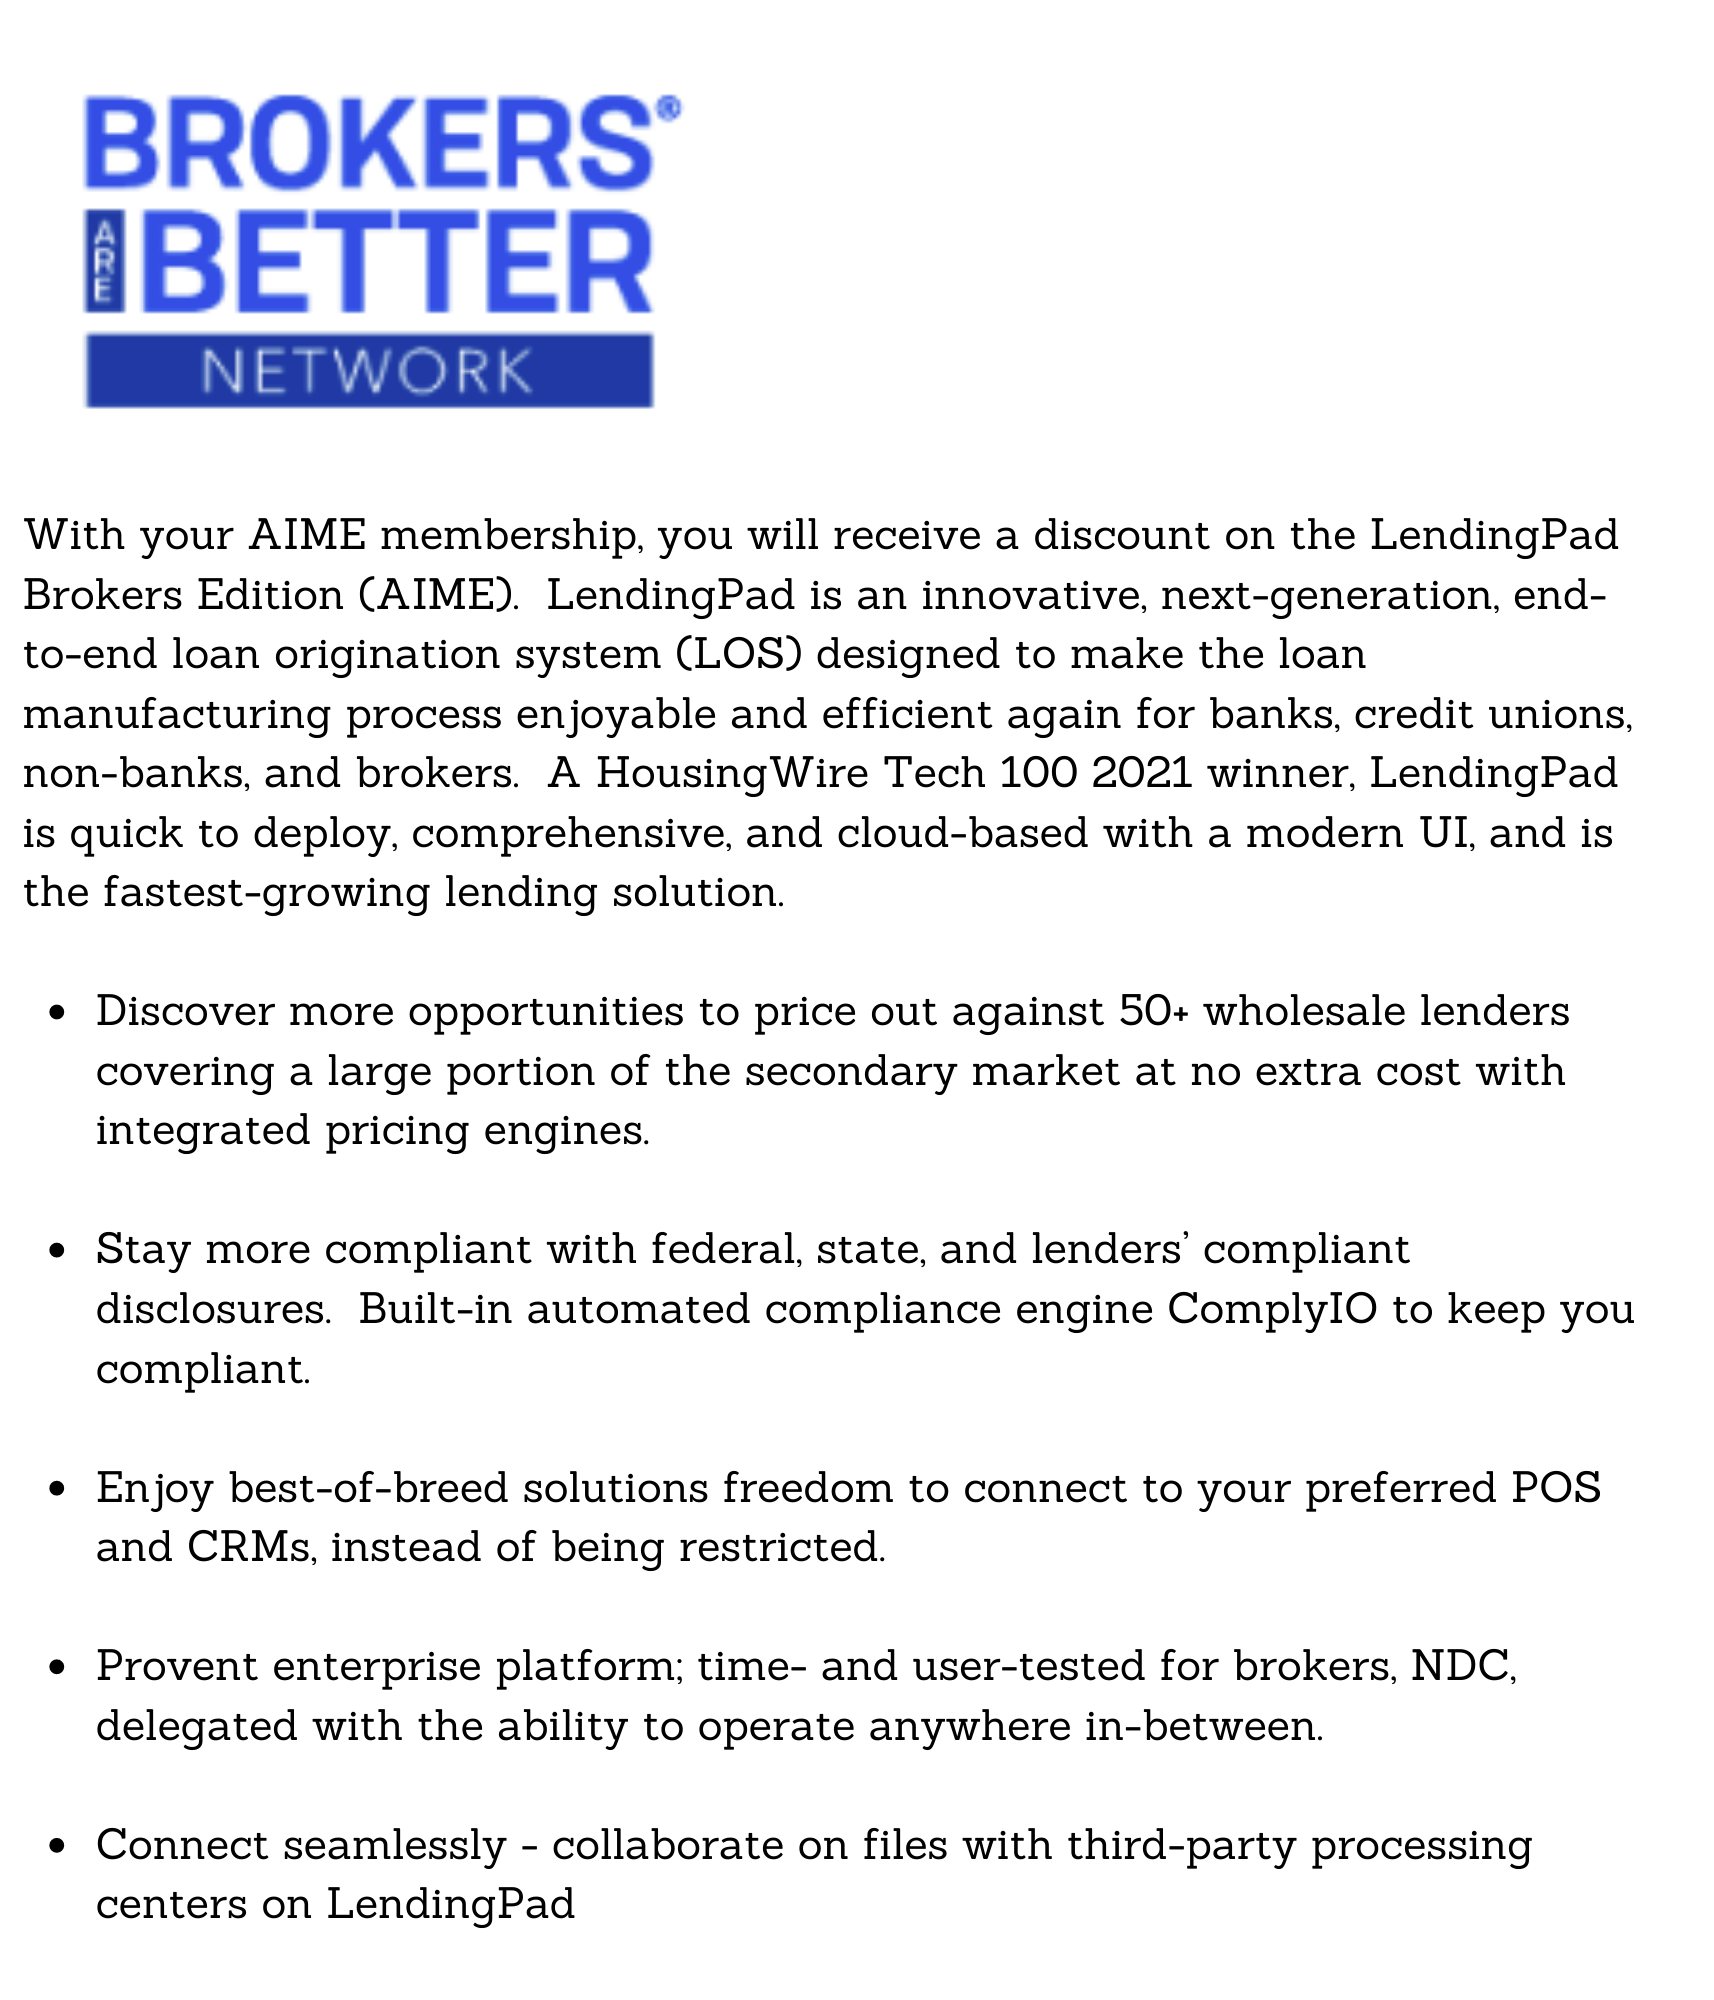 With your AIME membership, you will receive a discount on the LendingPad Brokers Edition (AIME). LendingPad is an innovative, next-generation, end-to-end loan origination system (LOS) designed to make the loan